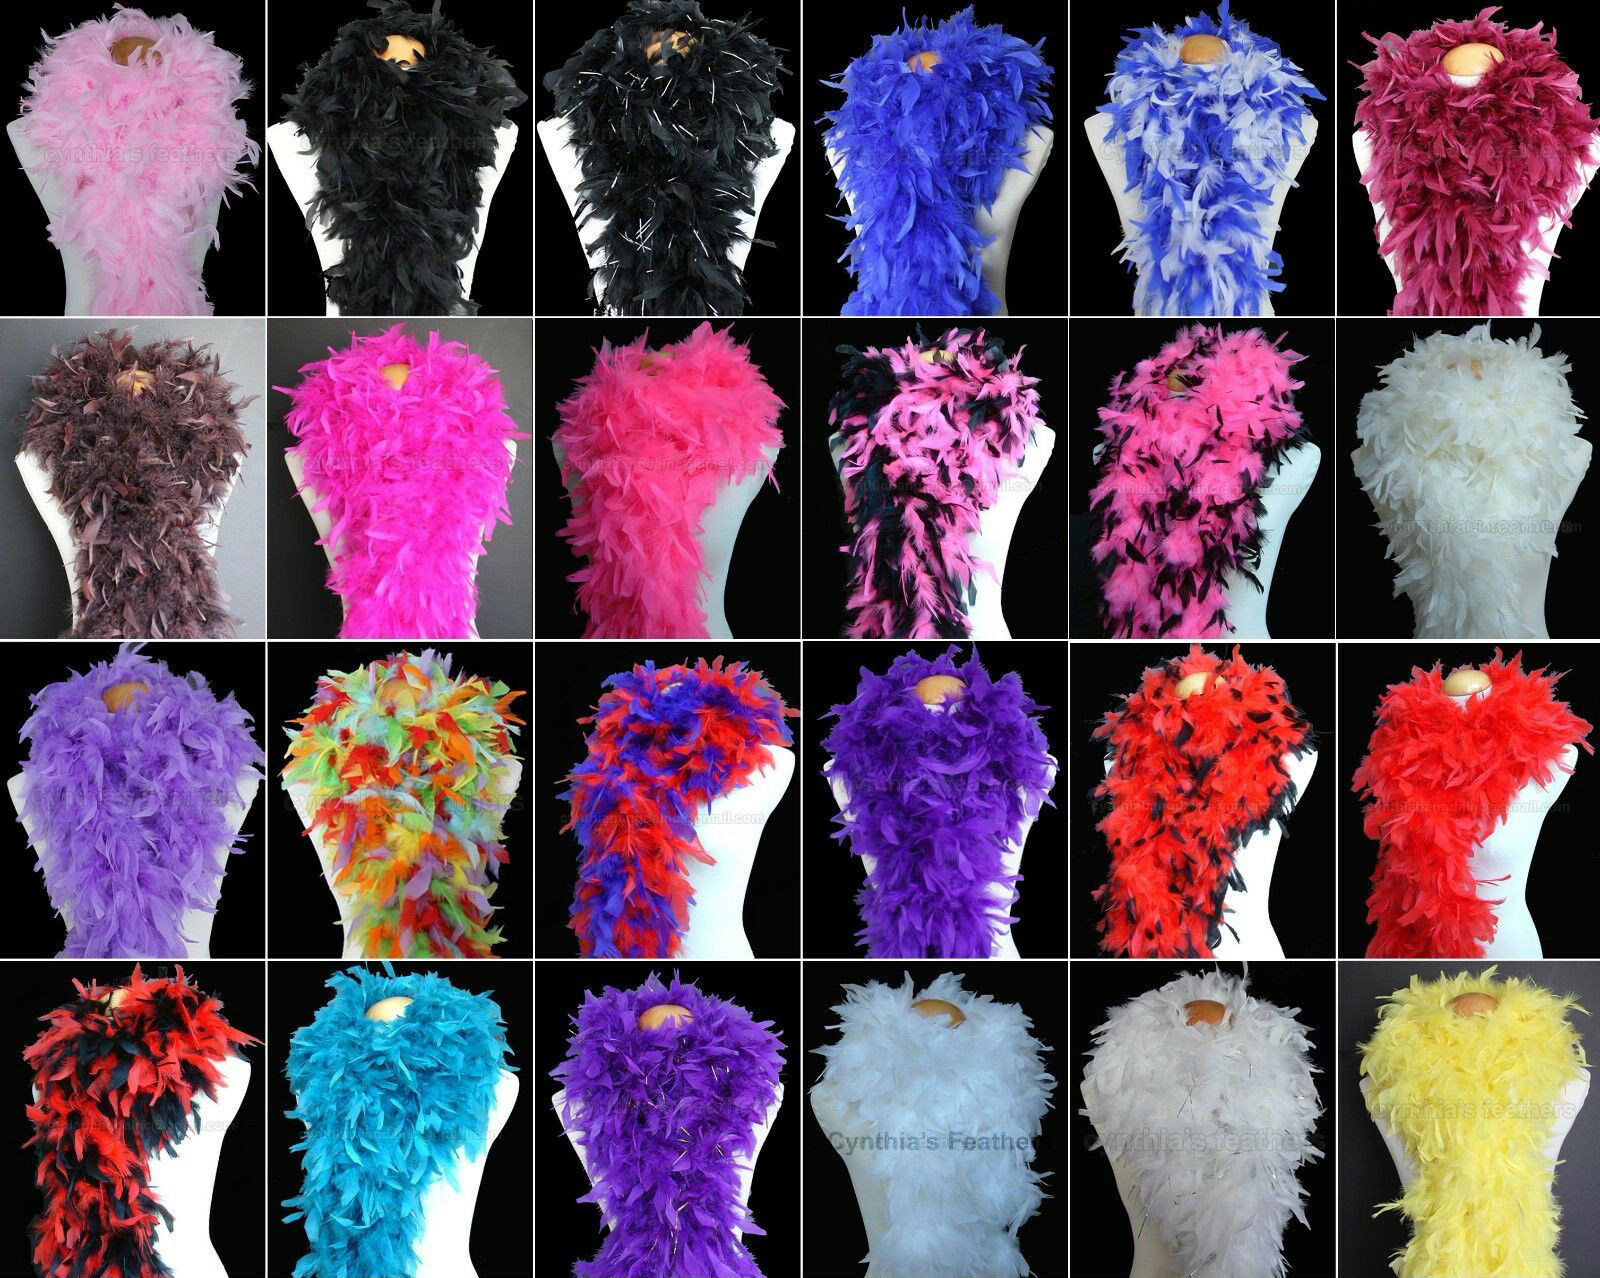 100 Gram Chandelle Feather Boas, 25+ Color & Patterns To Pick Up From, New!